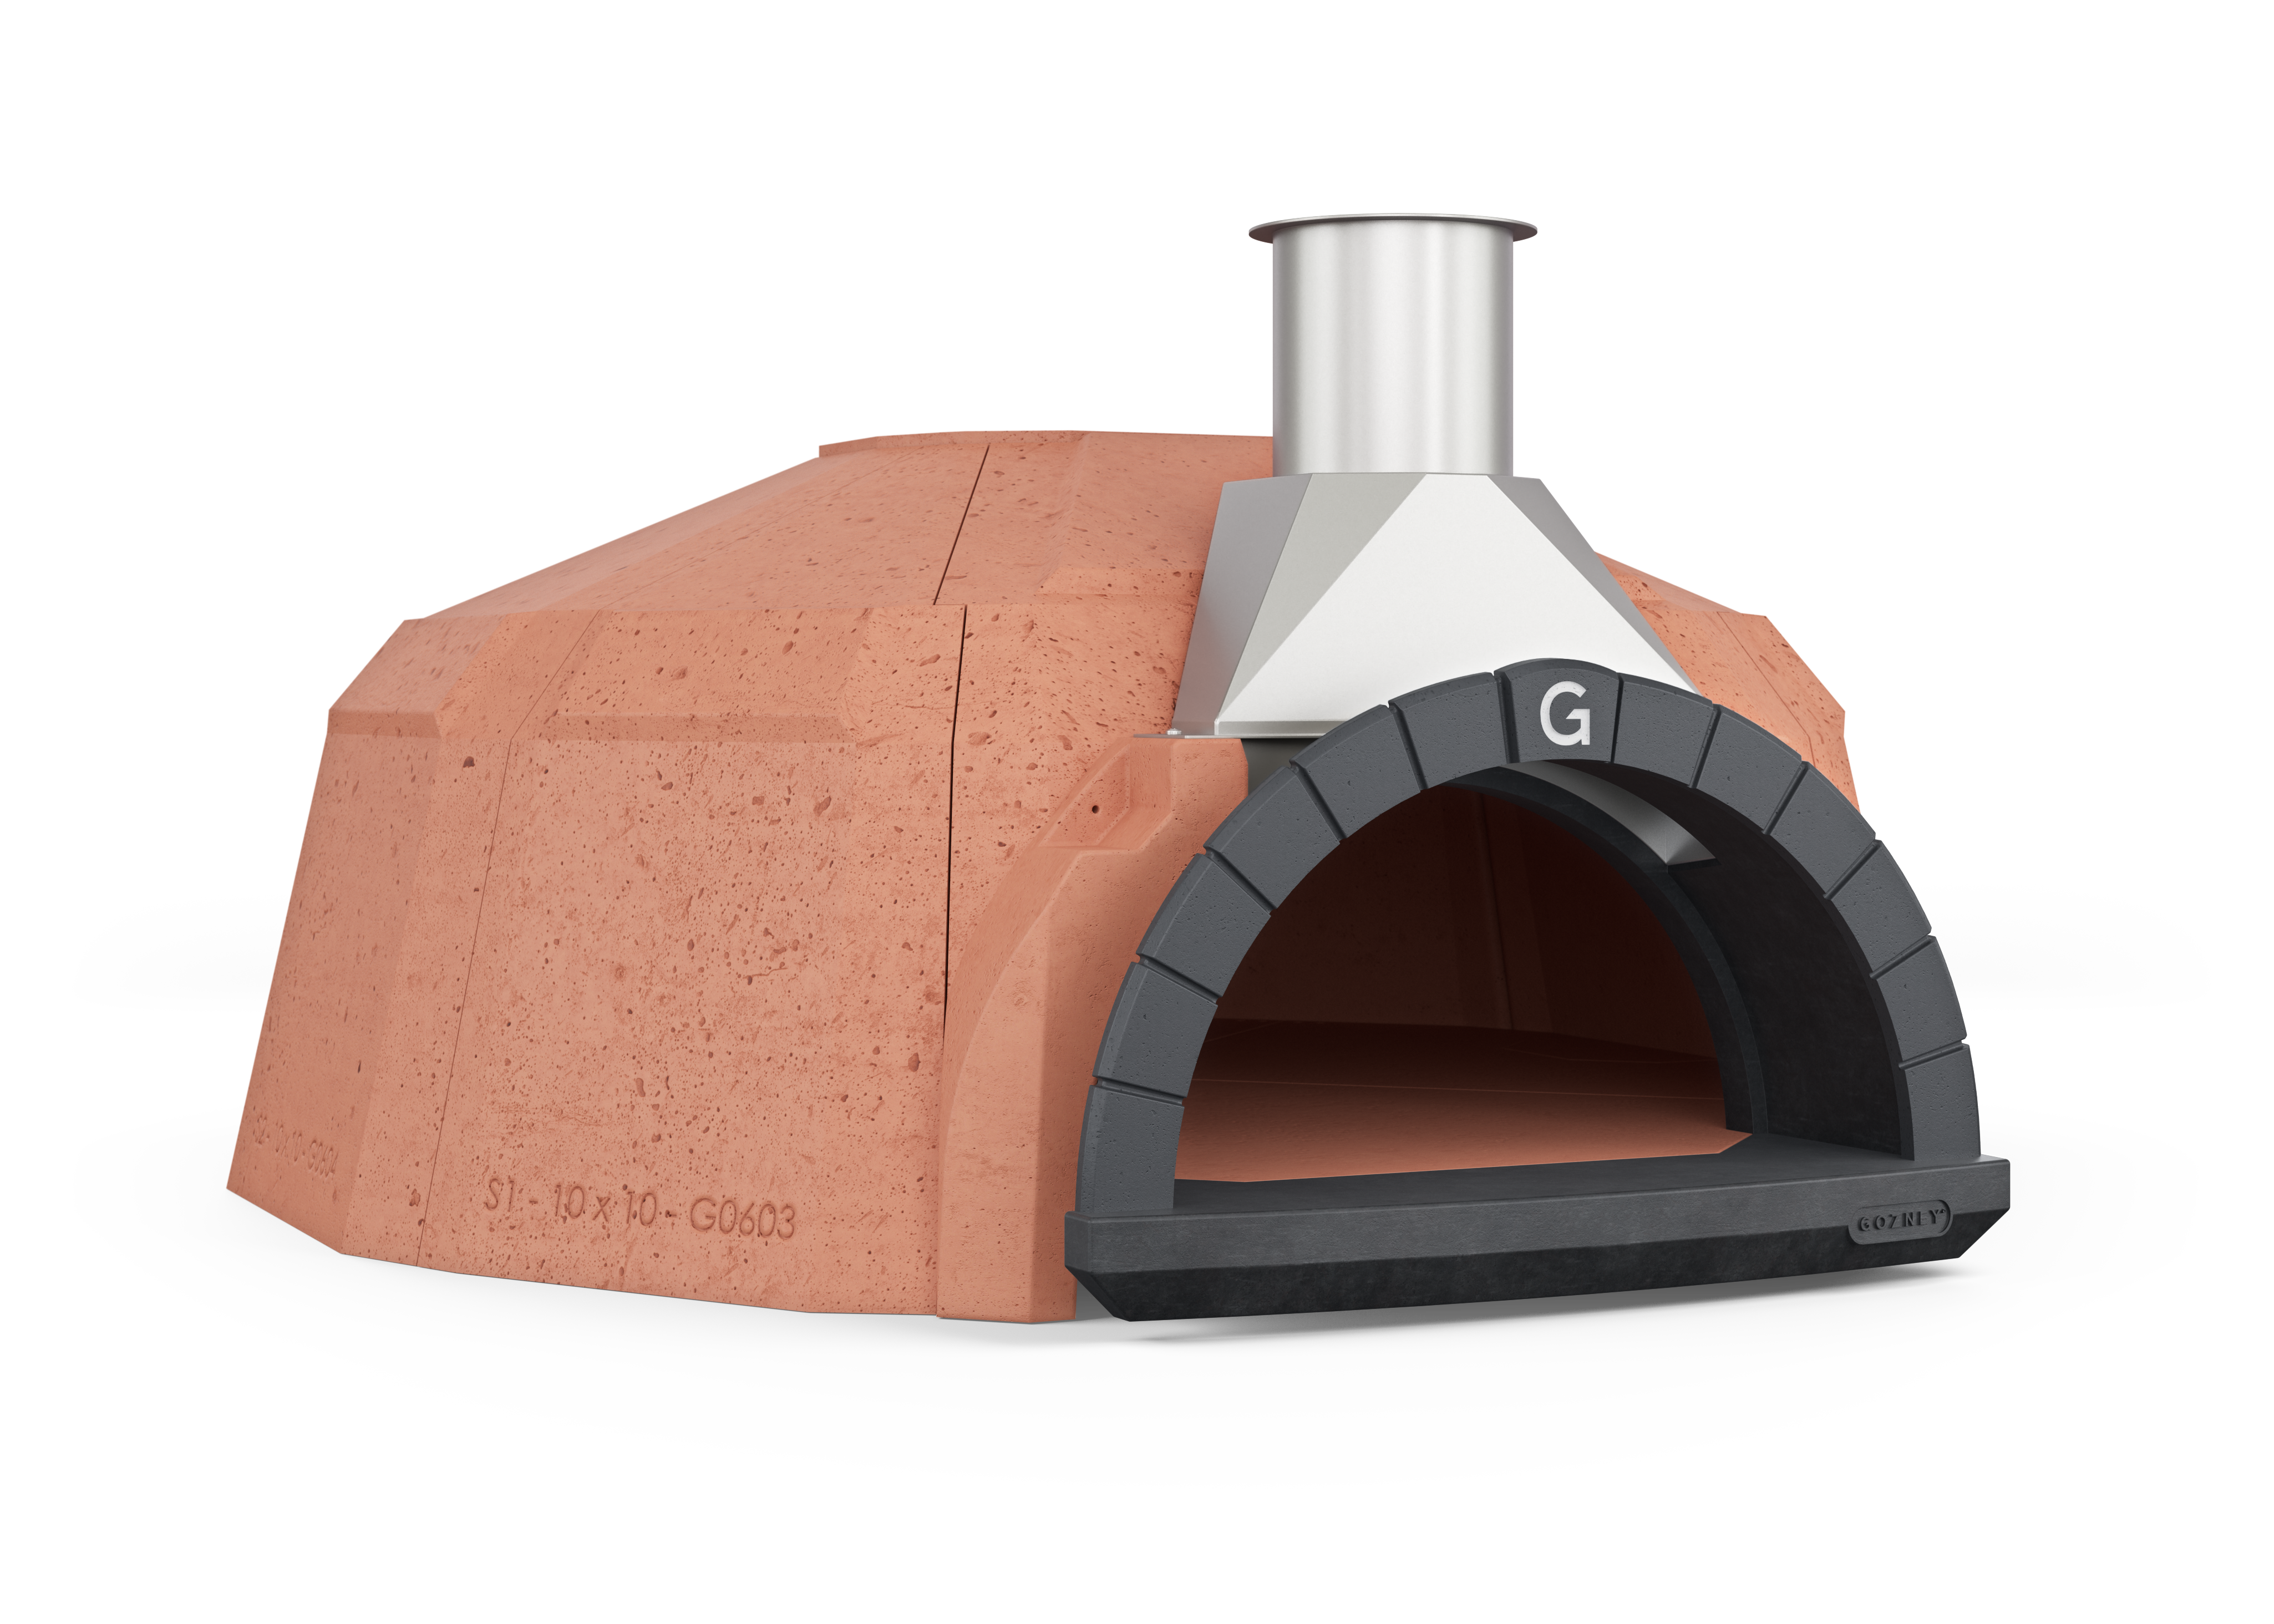 Pizza Oven Plans How to Build a Pizza Oven Americas Leading DIY Pizza Oven  Brand Shows You How to Build a Pizza Oven BEST SELLER (Download Now) 